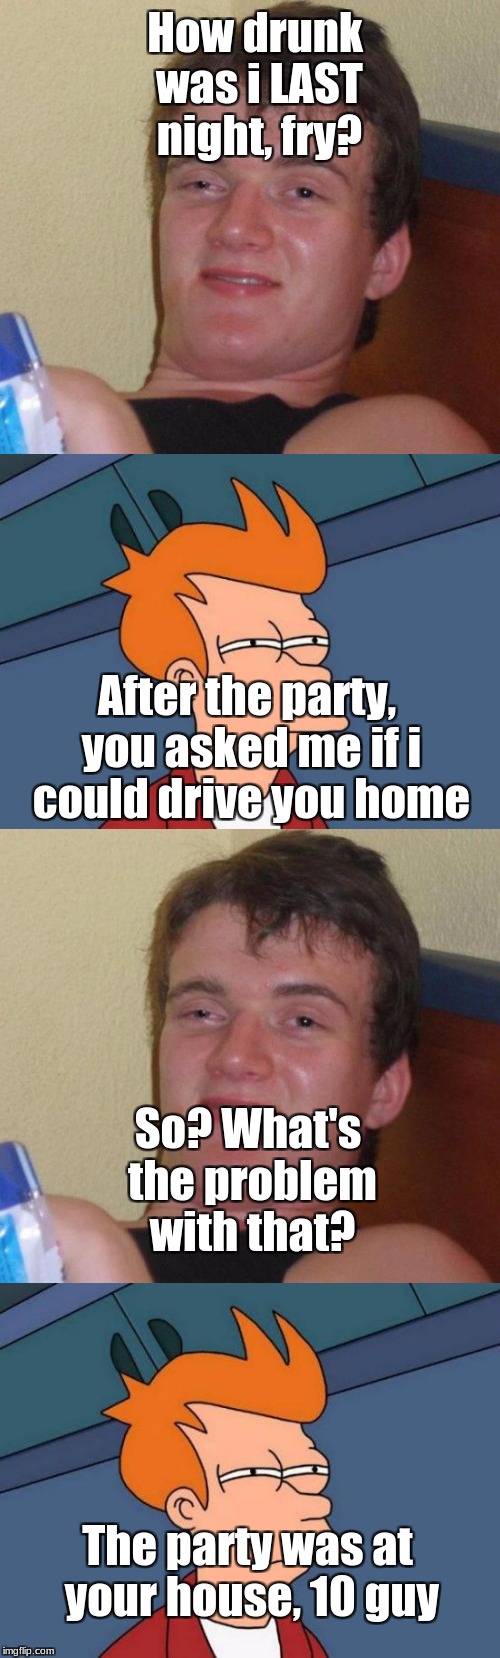 This is bigger than the LAST drunk one: | How drunk was i LAST night, fry? After the party, you asked me if i could drive you home; So? What's the problem with that? The party was at your house, 10 guy | image tagged in memes,drunk,10 guy,futurama fry,funny | made w/ Imgflip meme maker